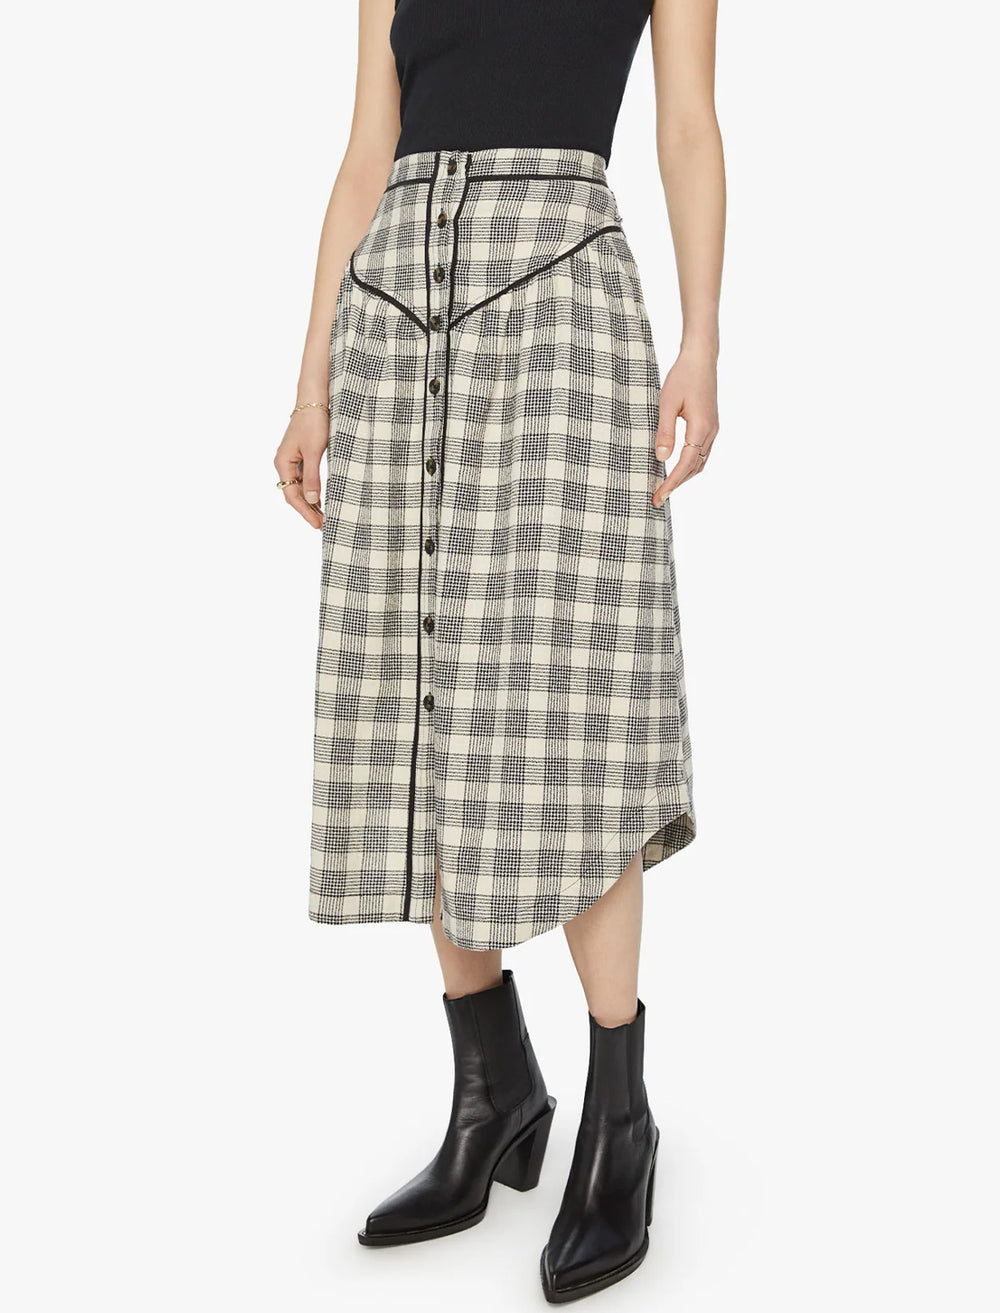 Model wearing Mother Denim's the out skirts in black and cream plaid.